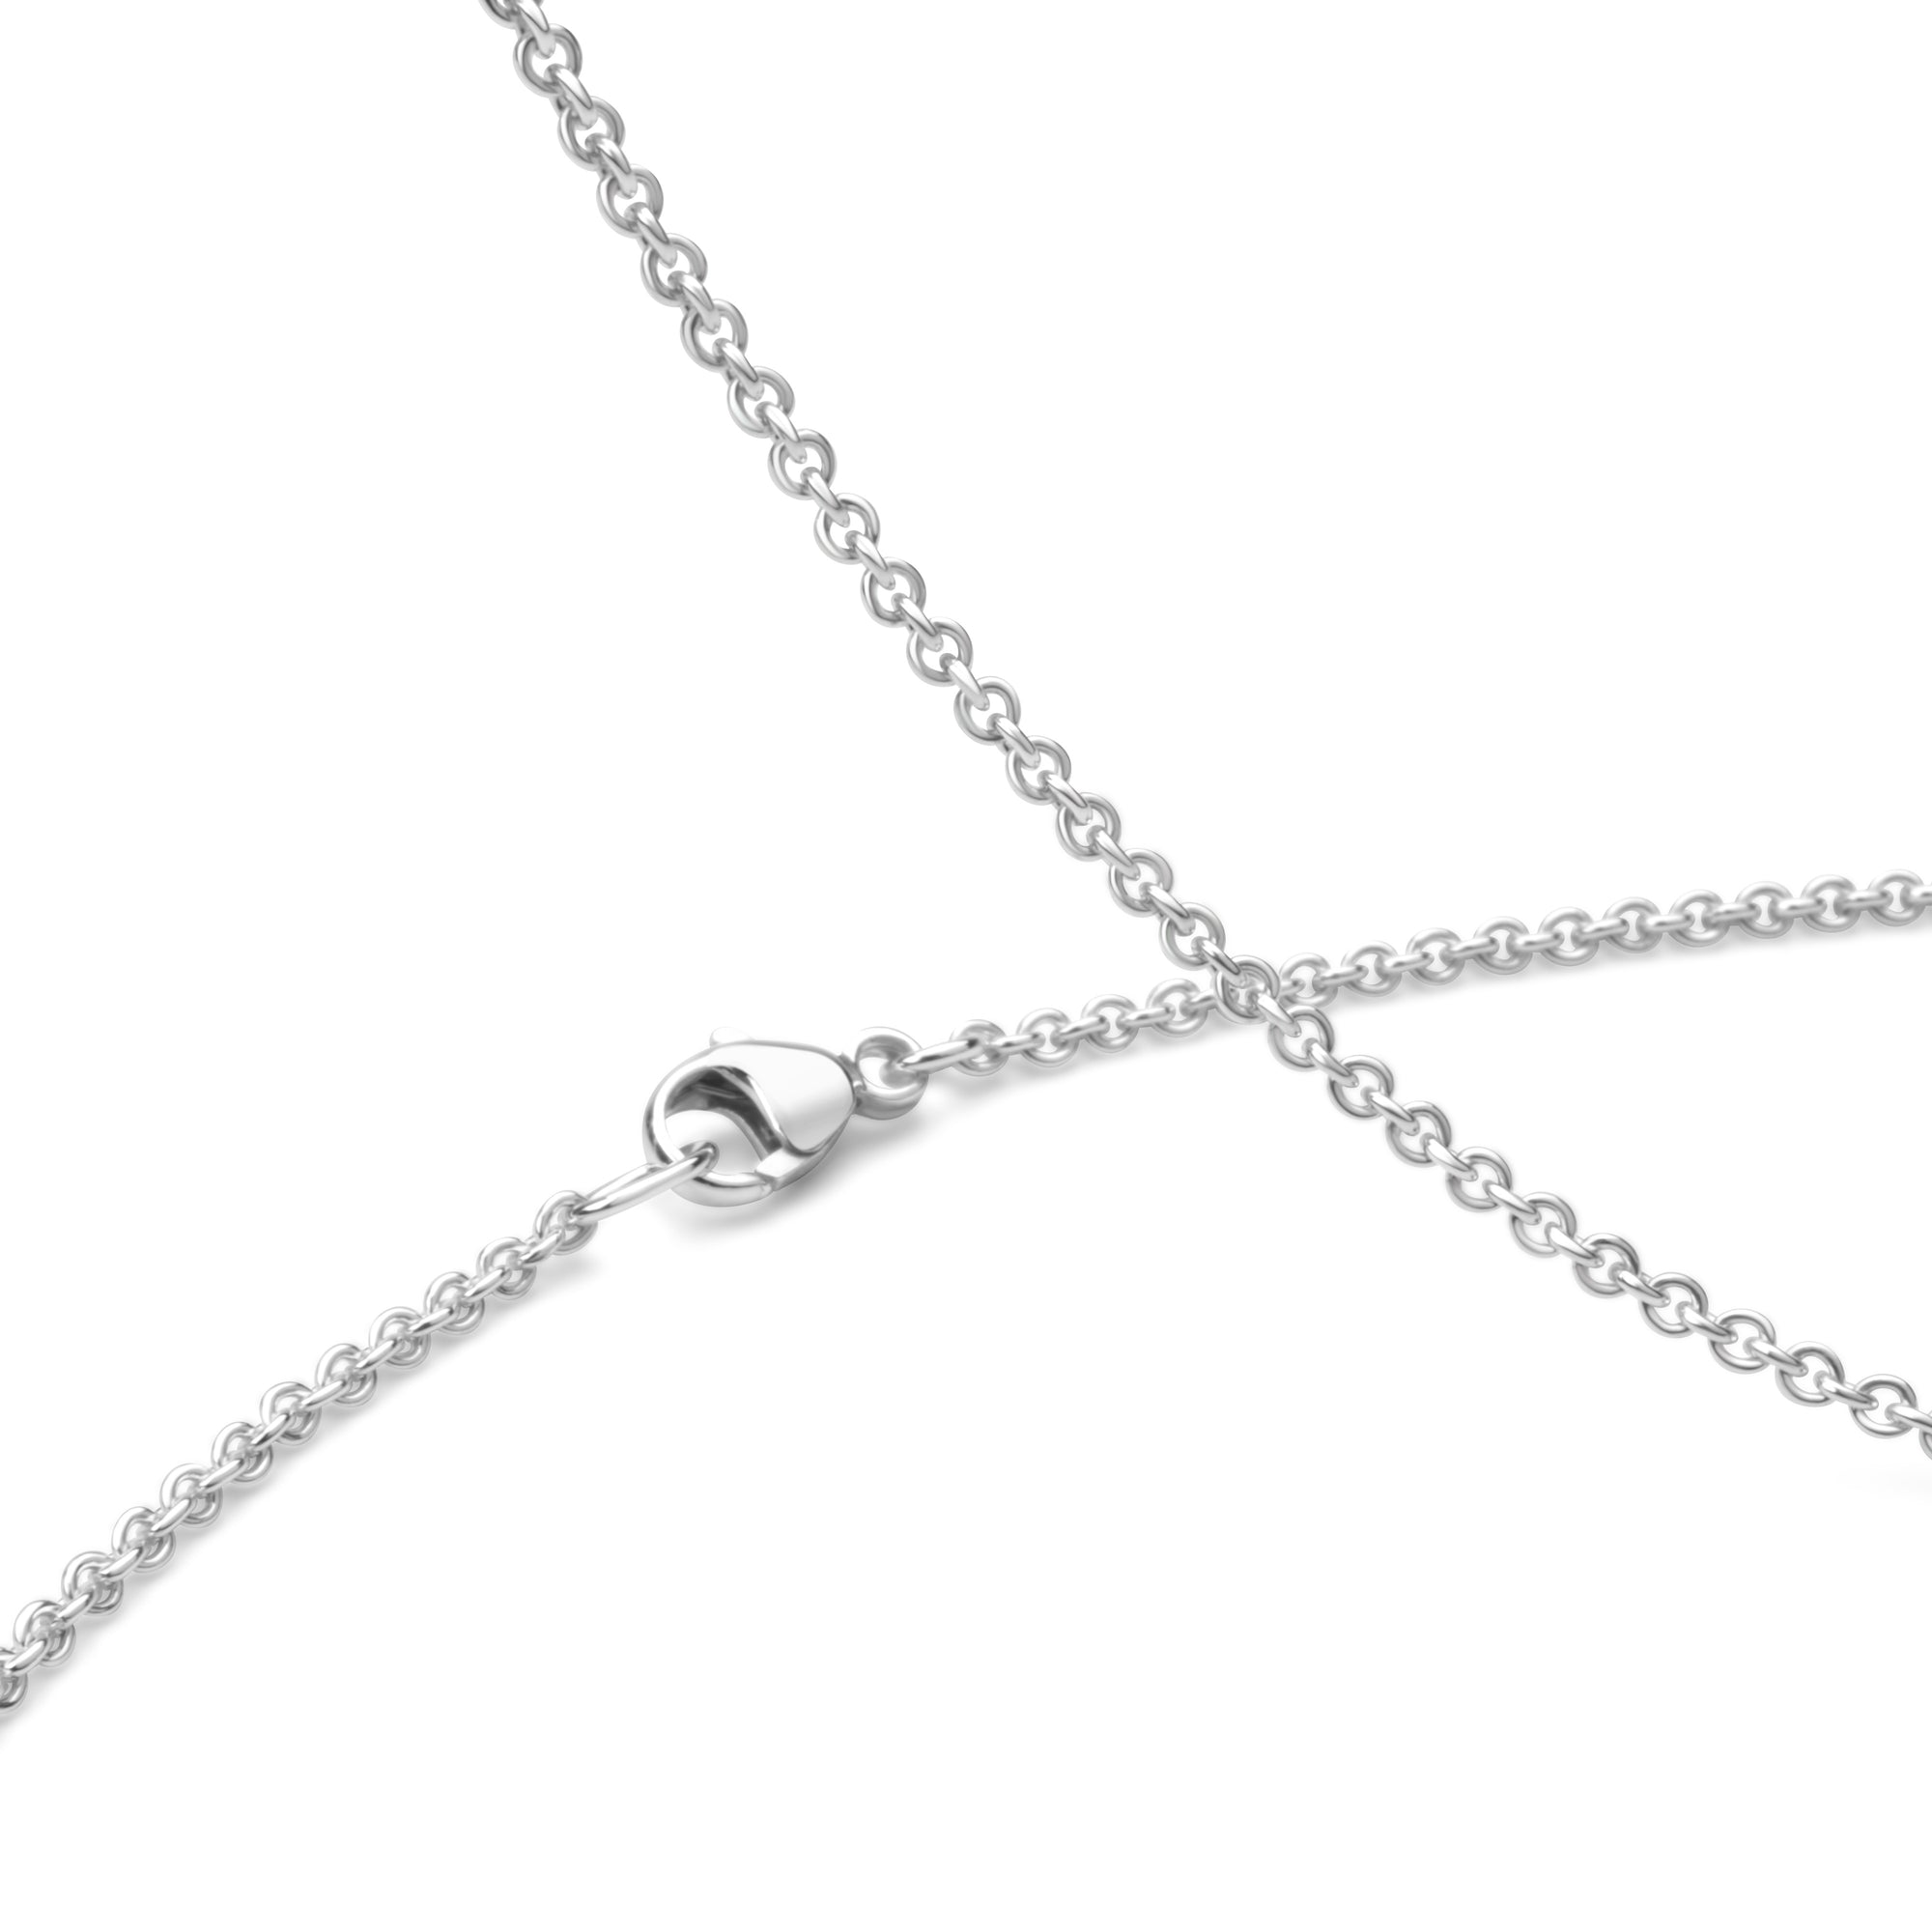 1.7mm Argentium Silver Cable Chain